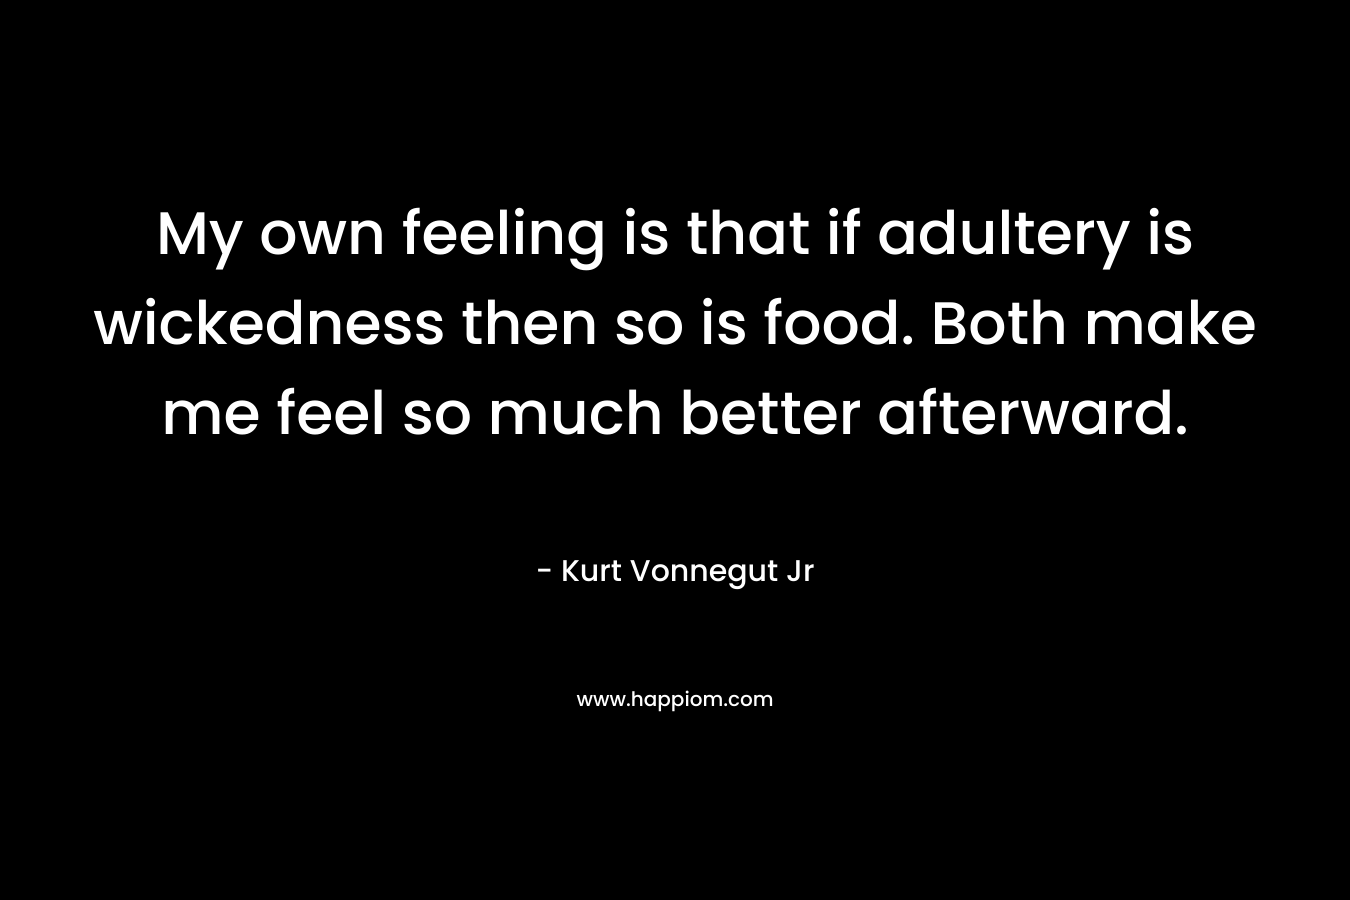 My own feeling is that if adultery is wickedness then so is food. Both make me feel so much better afterward. – Kurt Vonnegut Jr